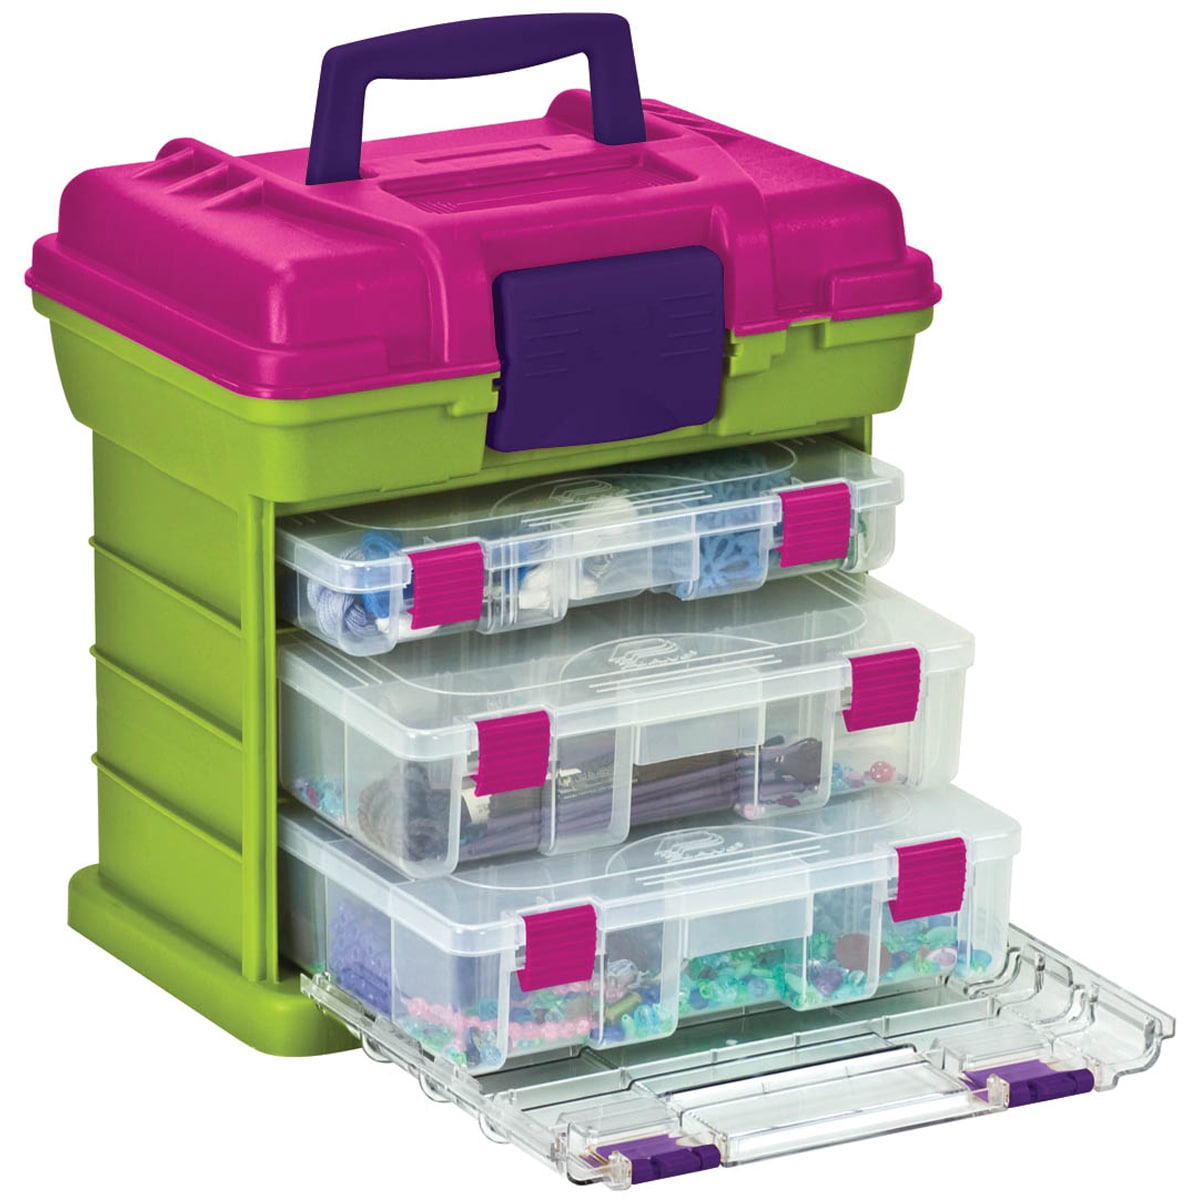 Creative Options Grabn Go 3 by Rack System 13x10x14 green/magenta